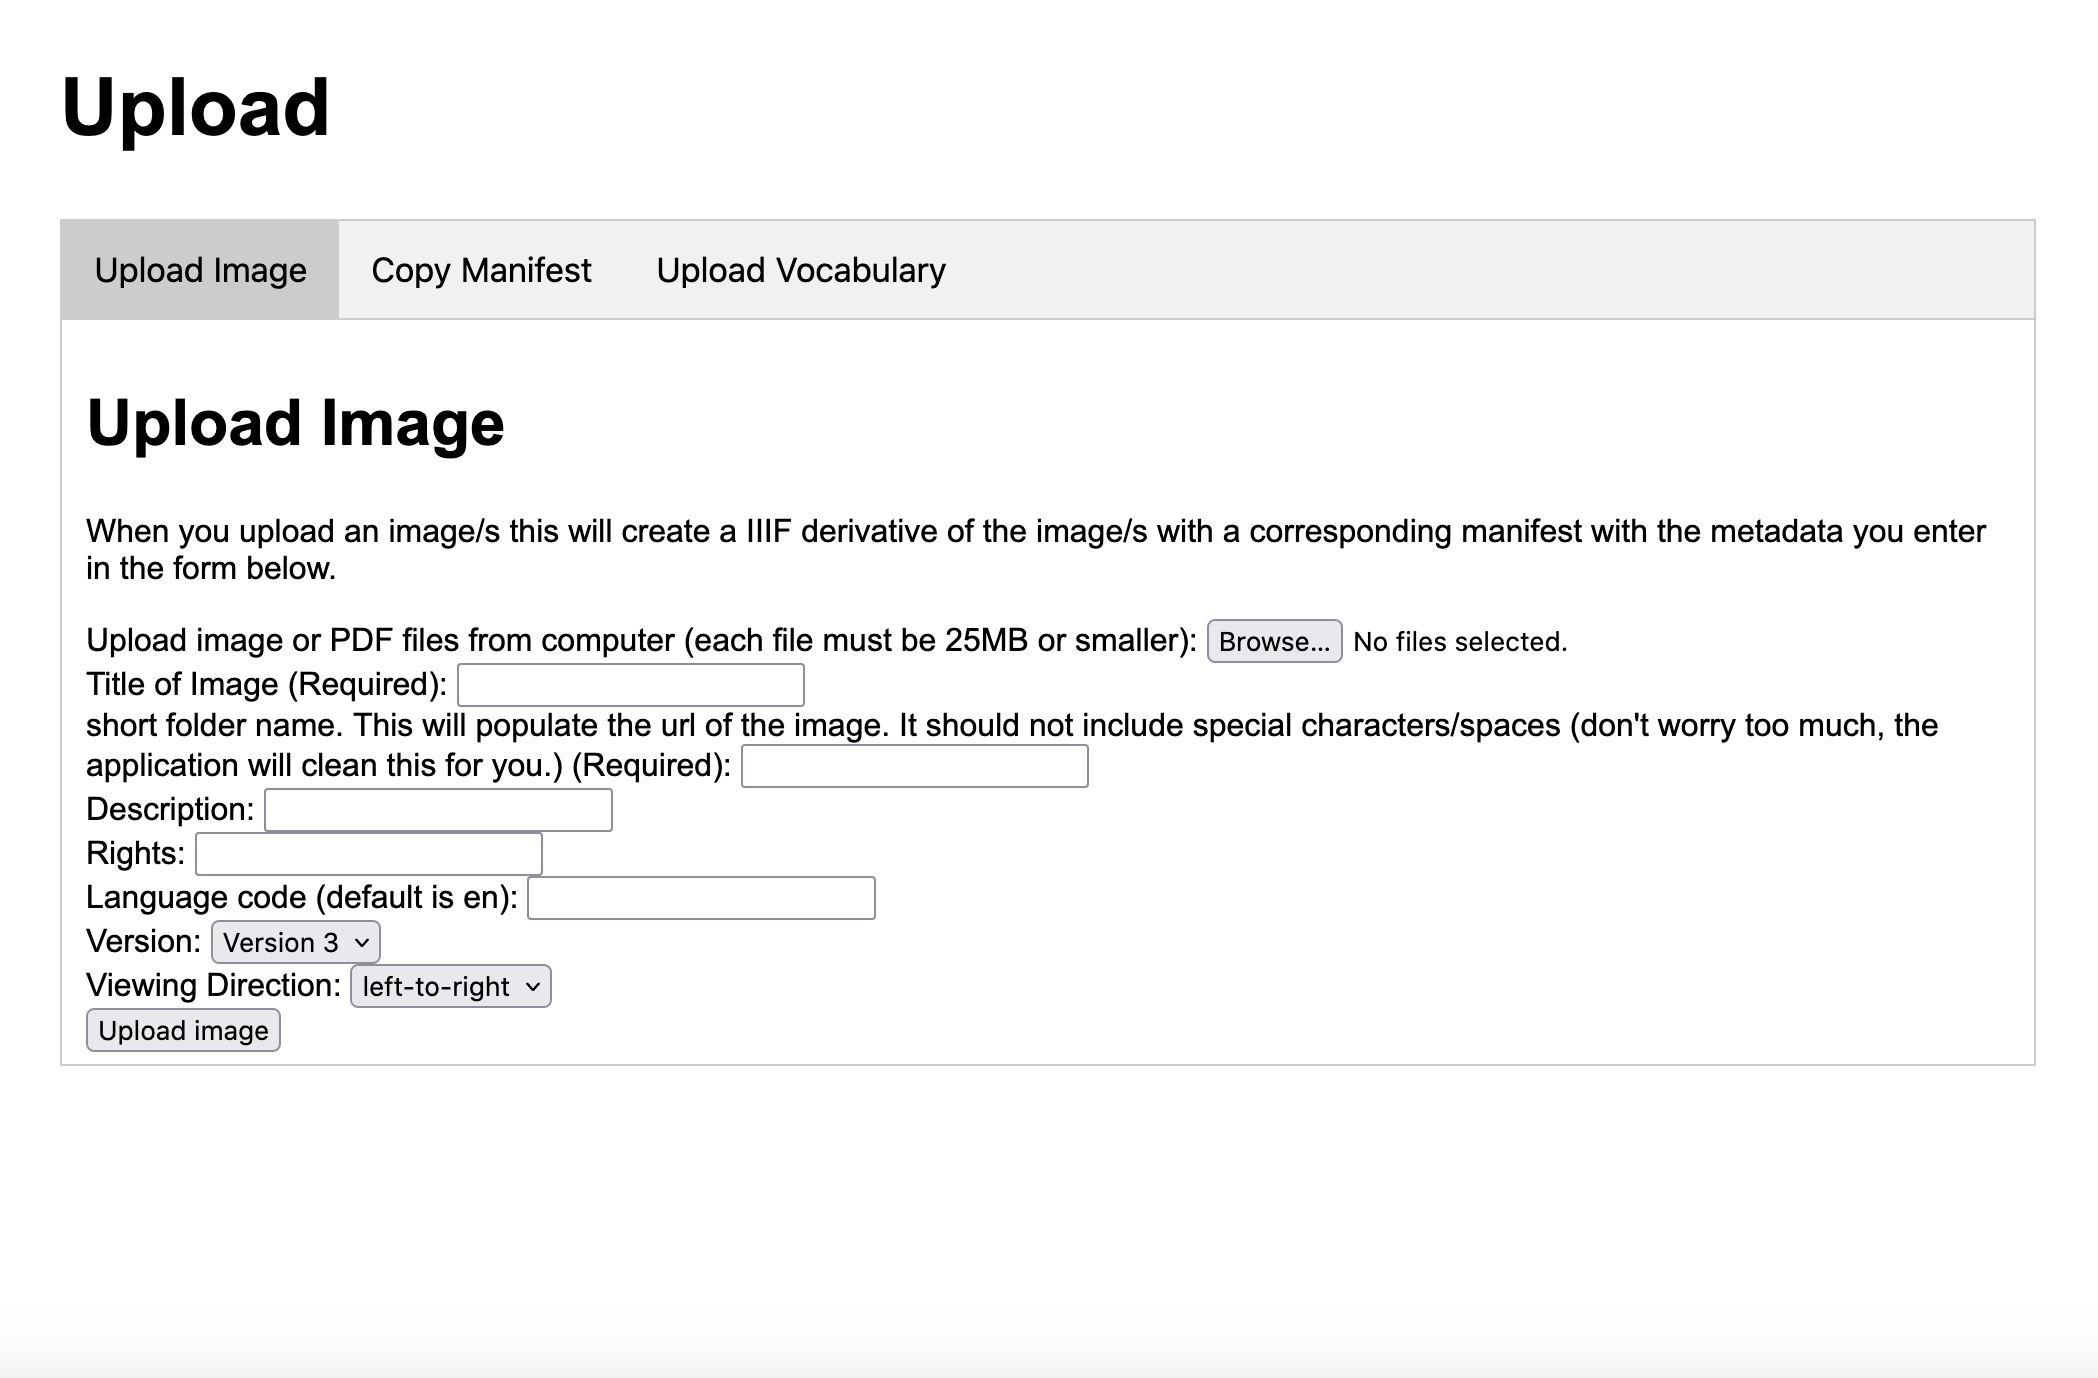 image showing upload form which includes fields for title, description, rights, etc.